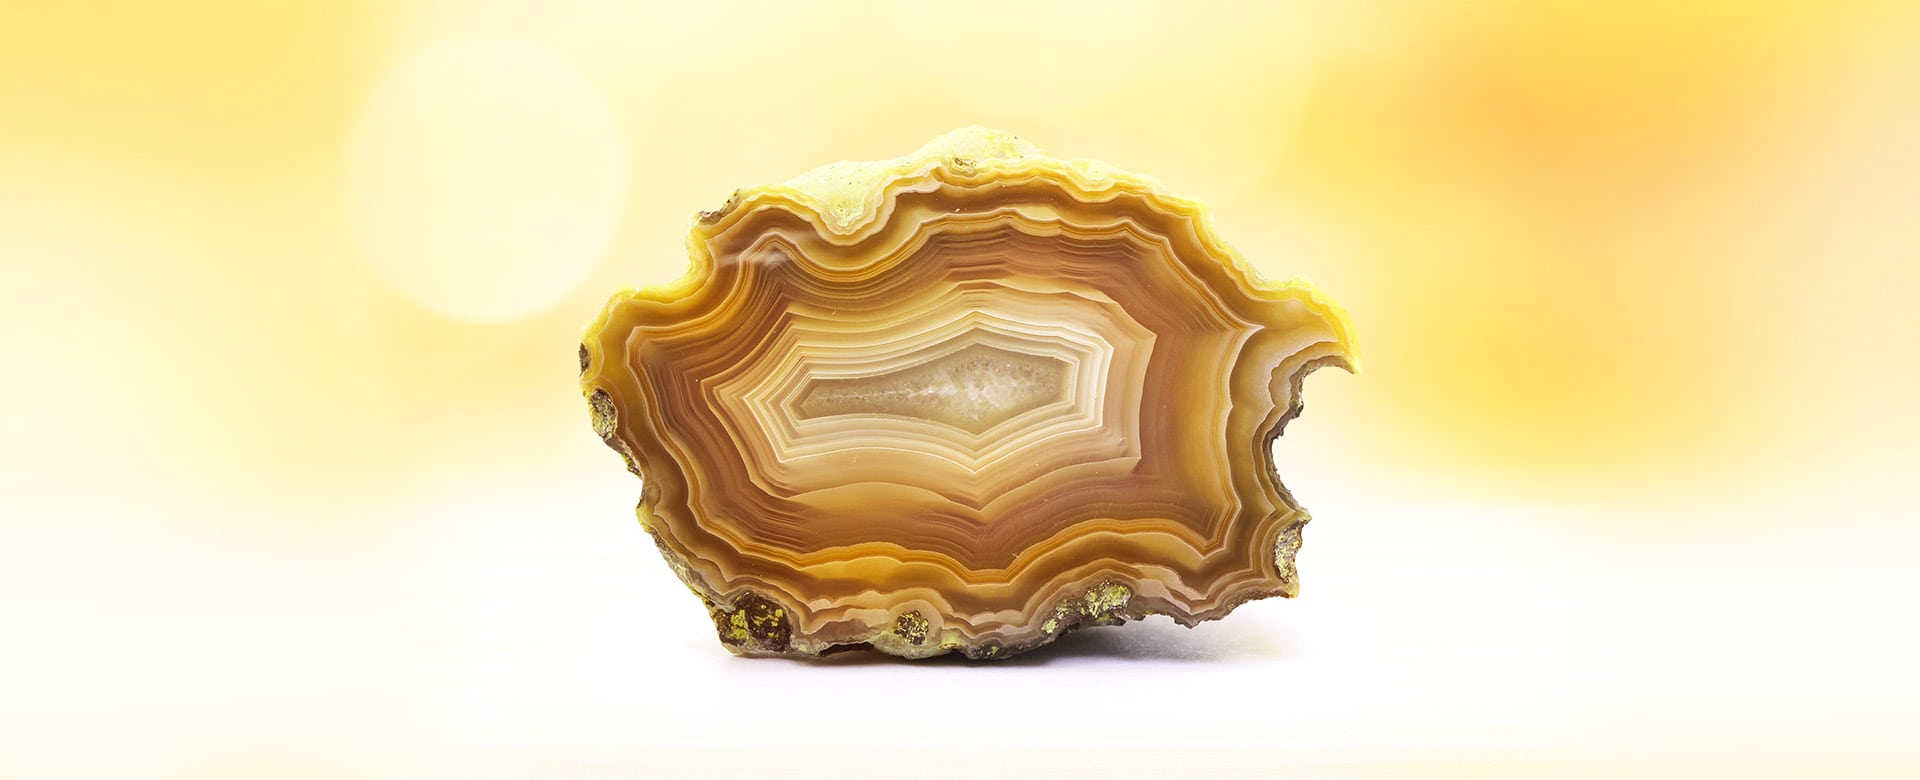 Orange Agate Meaning and Properties 1